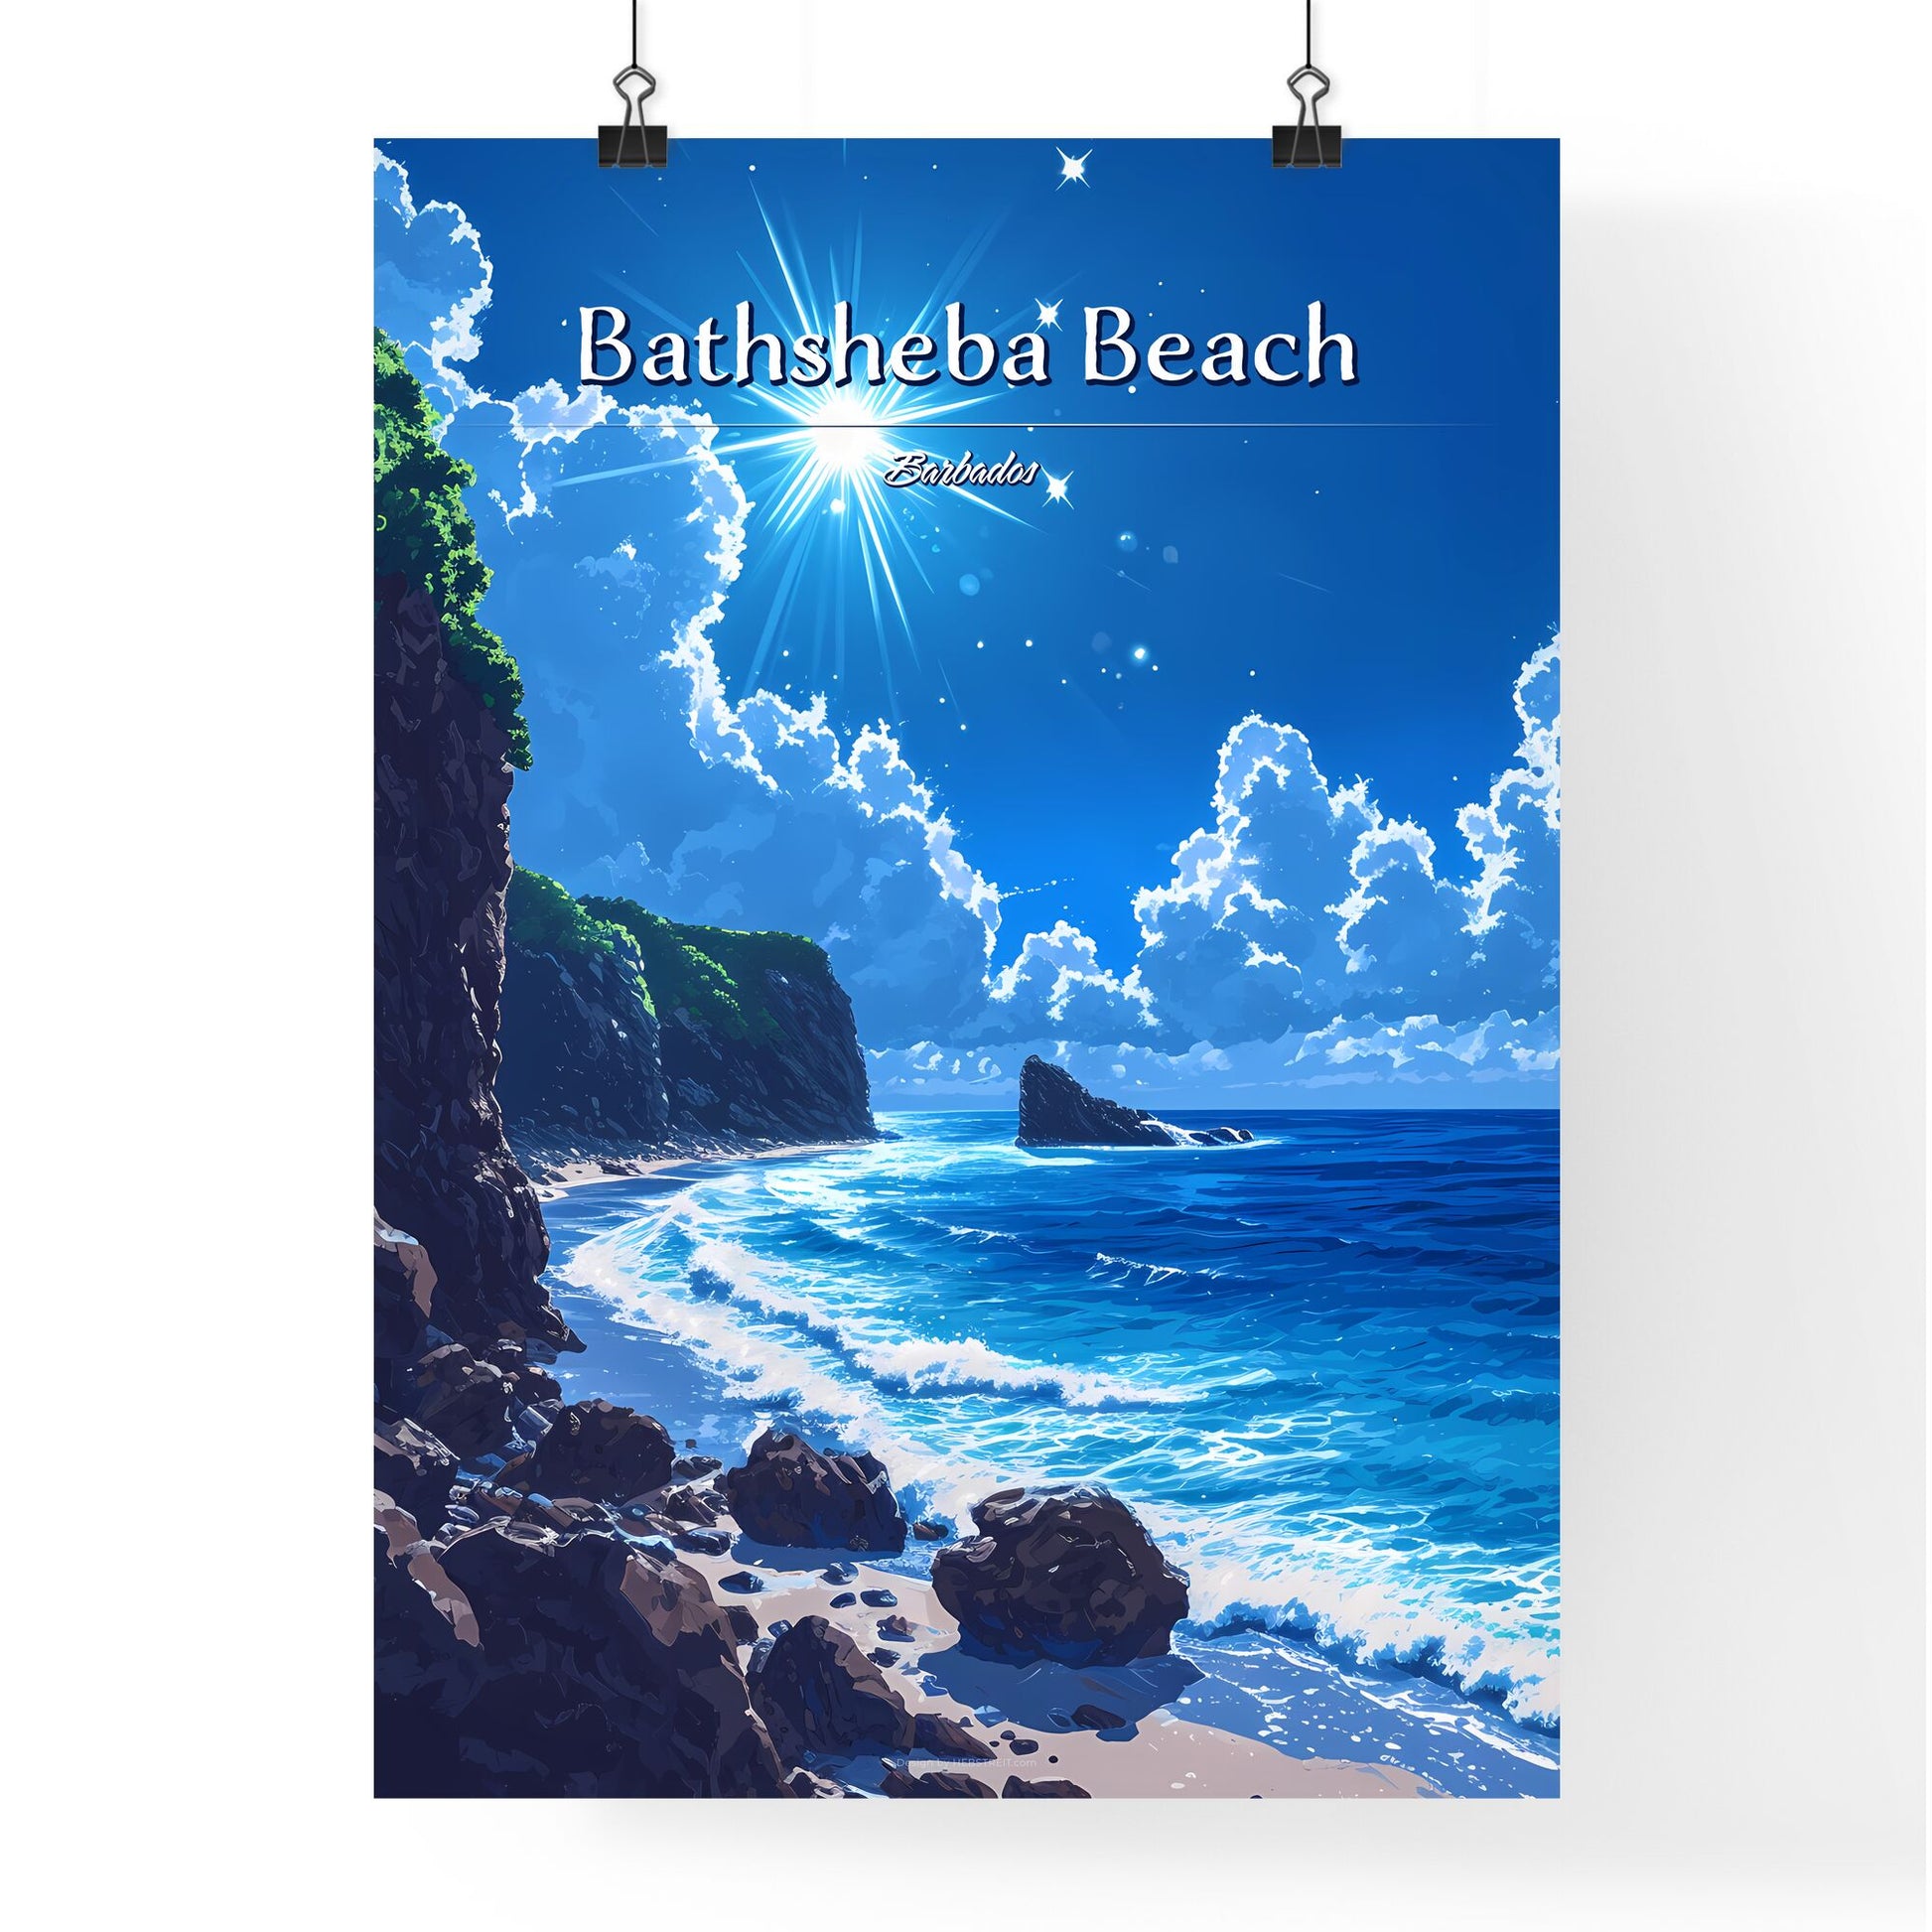 Bathsheba Beach, Barbados - Art print of a beach with rocks and water and a sunny sky Default Title